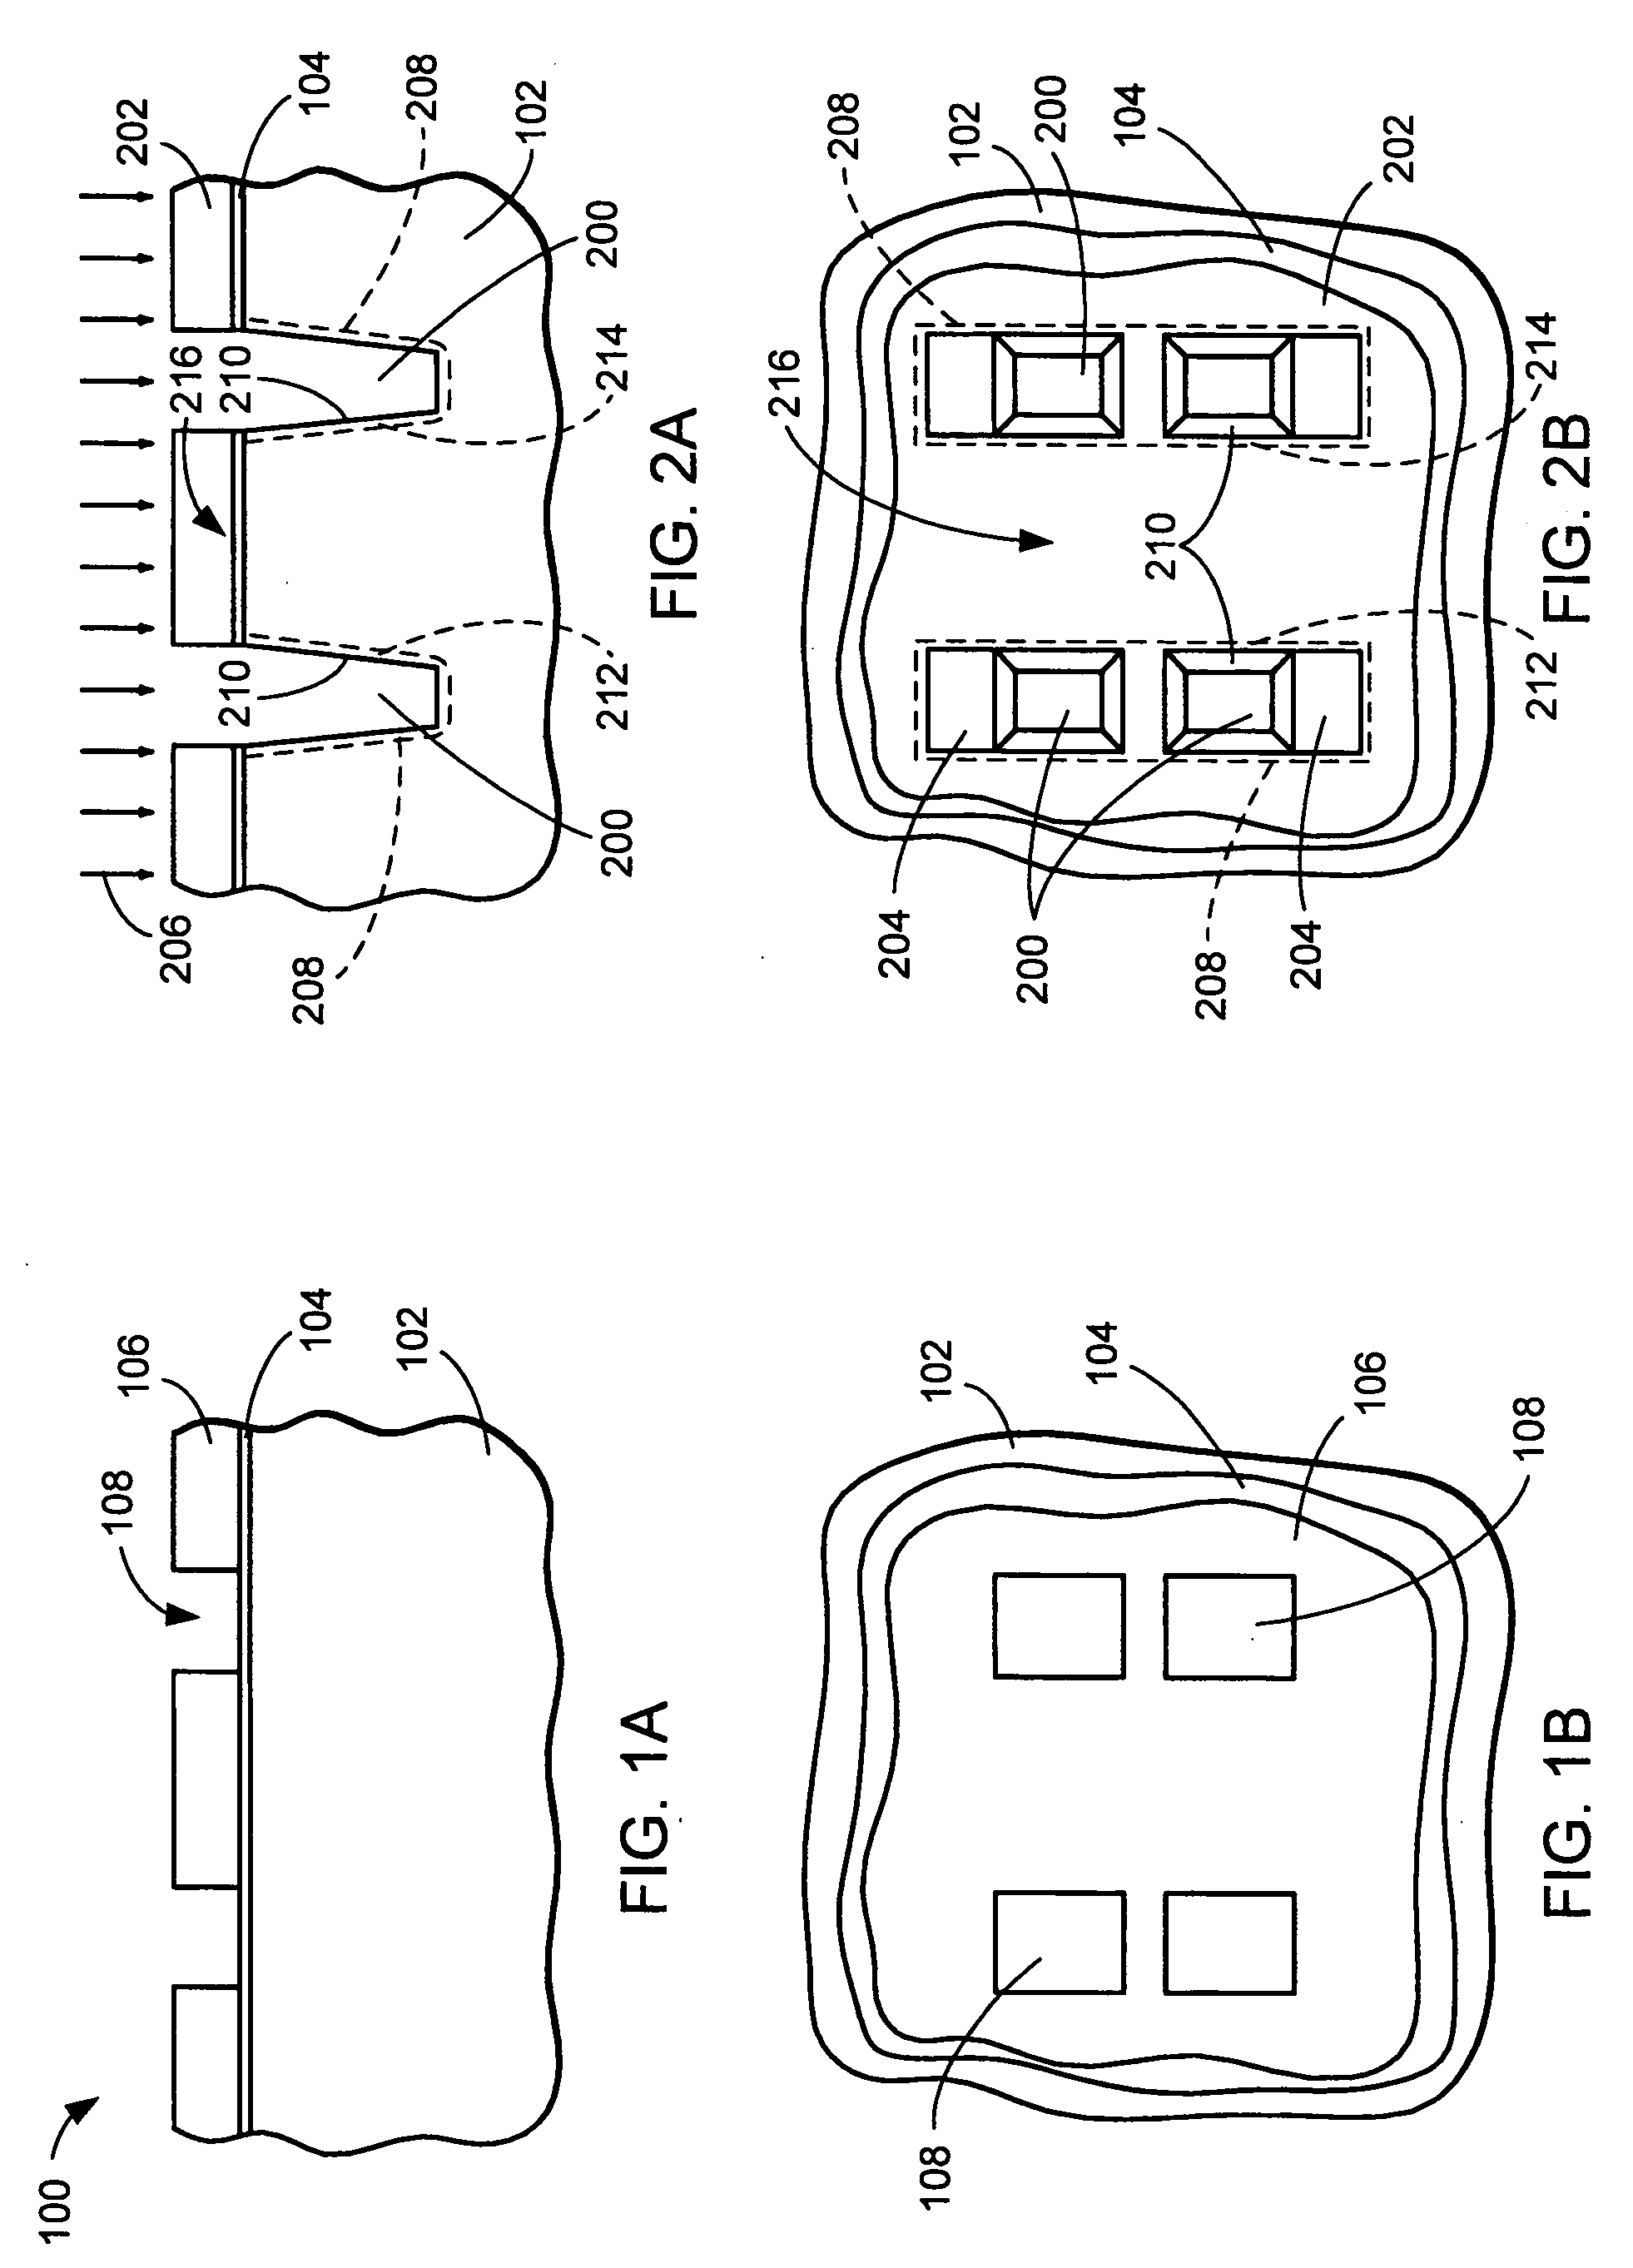 Non-volatile memory and manufacturing method using STI trench implantation